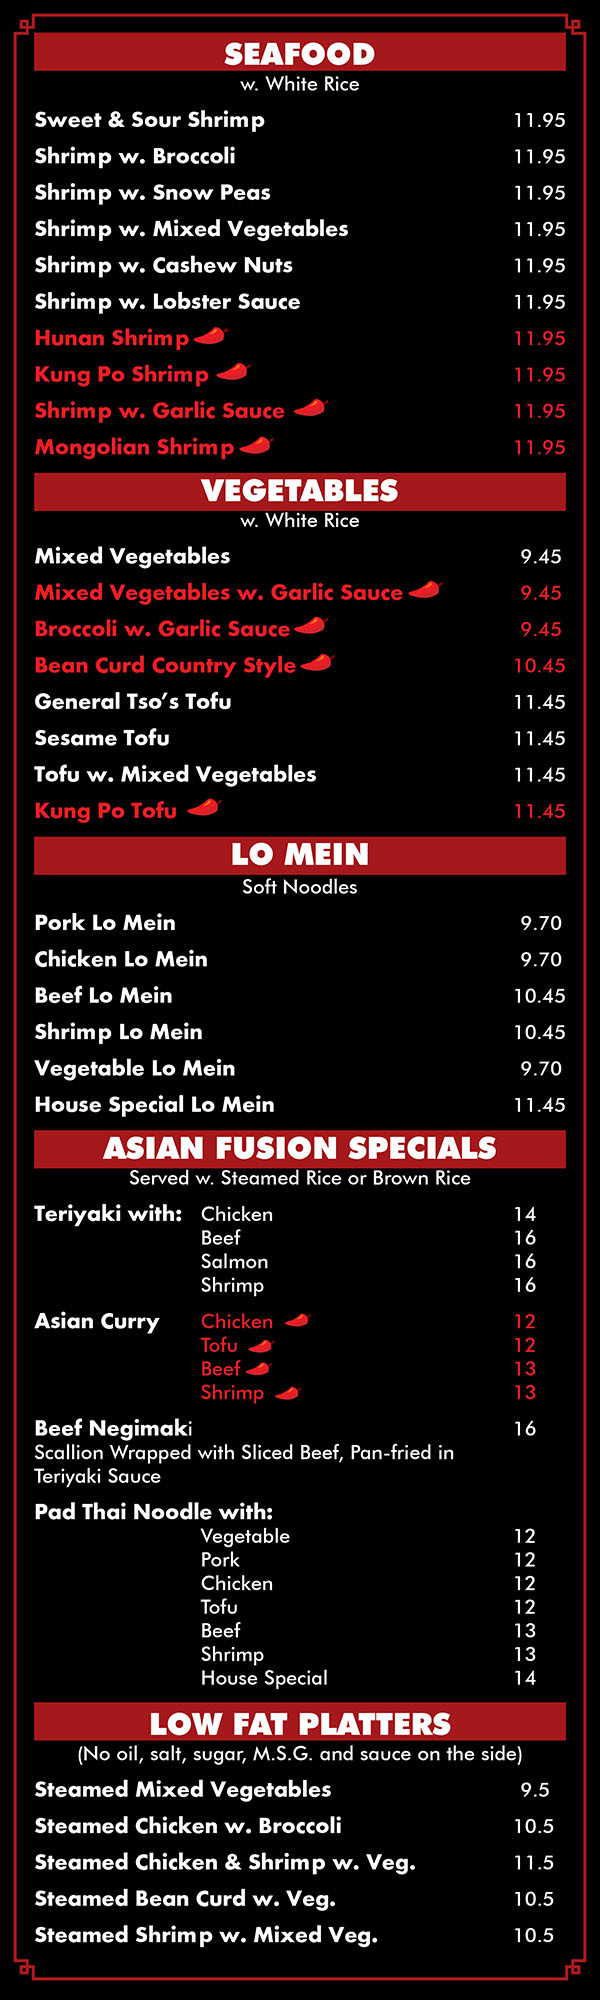 Asian Fusion Restaurant Menu Lincoln NE - Page 5
BENTO BOX LUNCH 8.5 
Served w. Soup, Salad, and 4 pc's. Cali 
Broccoli w. ( Chicken/Pork/Shrimp) 
Sweet & Sour w.(Chicken/Shrimp) 
Snow Peas w. (Chicken/Beef/Shrimp) 
Hunan w. (Chicken/Beef/Shrimp), 
General Tso's (Chicken)) 
Sesame (Chicken) 
Orange (Chicken) 
Cashew Nut (Chicken/Shrimp) 
Mongolian w. (Chicken/Beef/Shrimp) 
Garlic Sauce w. (Chicken/Beef/ Shrimp) 
Kung Po w. (Chicken/Beef/ Shrimp) 
Mango w. (Chicken/Beef/Shrimp) 
Curry w. (Chicken/Beef/Shrimp) , 
Teriyaki w. (Chicken/Beef/Salmon/Shrimp) 


LOW FAT PLATTERS (No Oil, Salt, Sugar, M.S.G. and Sauce on Side) 
Order 
D1. Steamed Mixed Vegetables 8 
D2. Steamed Chicken w. Broccoli 9 
D3. Steamed Chicken & Shrimp w. Veg. 10 
D4. Steamed Bean Curd w. Veg 9 
D5. Steamed Shrimp w. Mixed Veg. 9 
